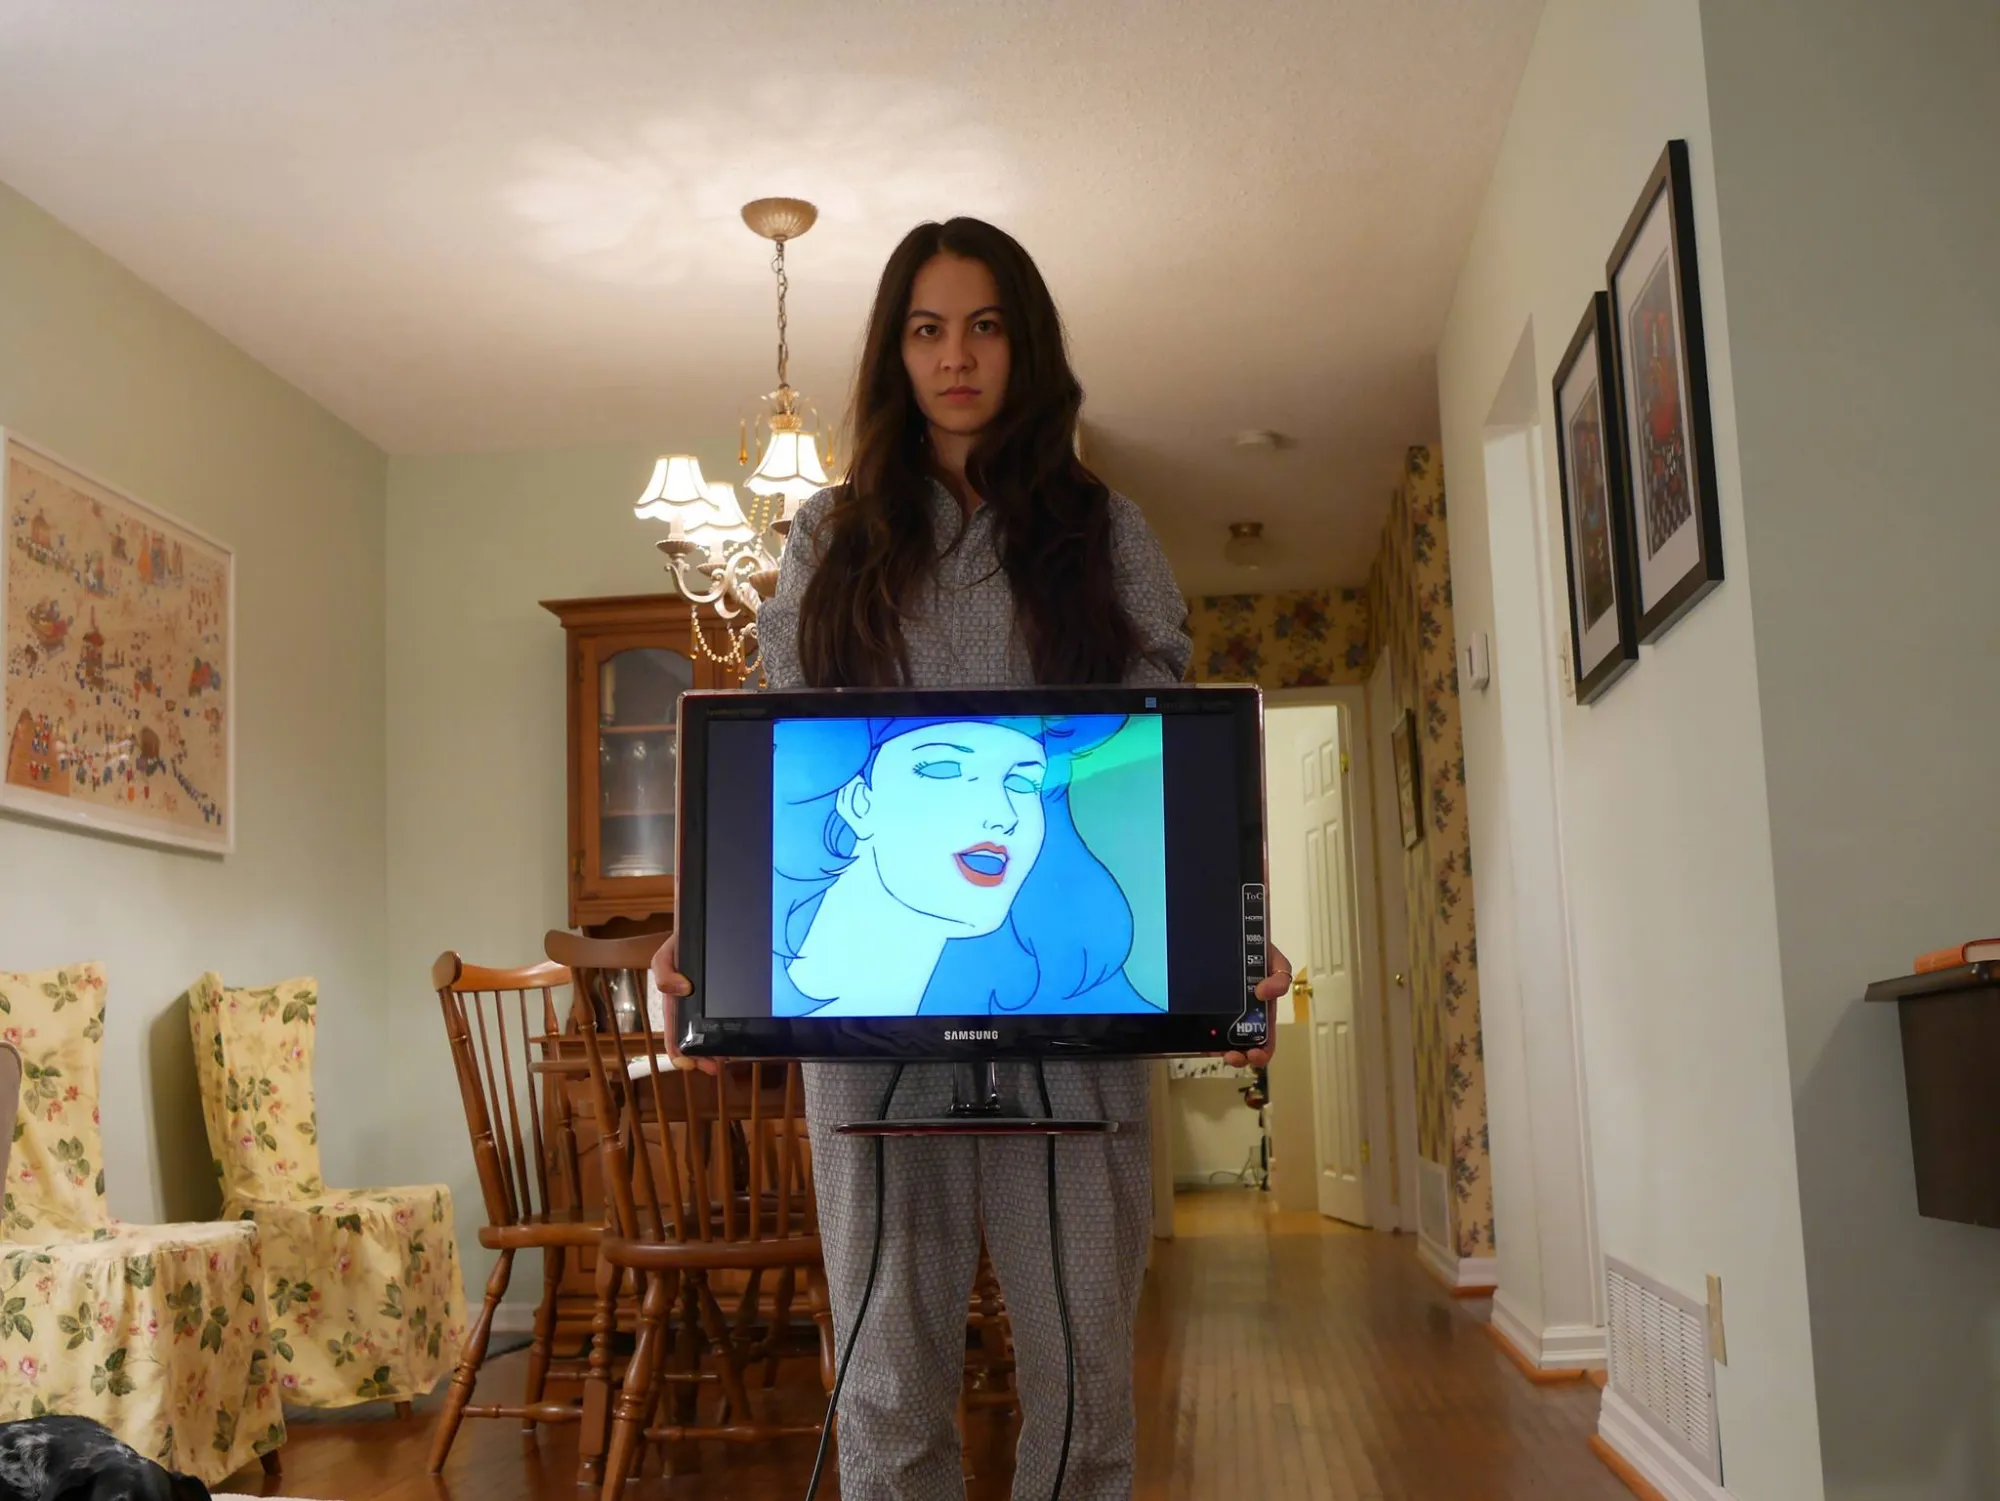 Alison Kobayashi standing in a traditionally styled dining room behind a screen showing a cartoon woman. 